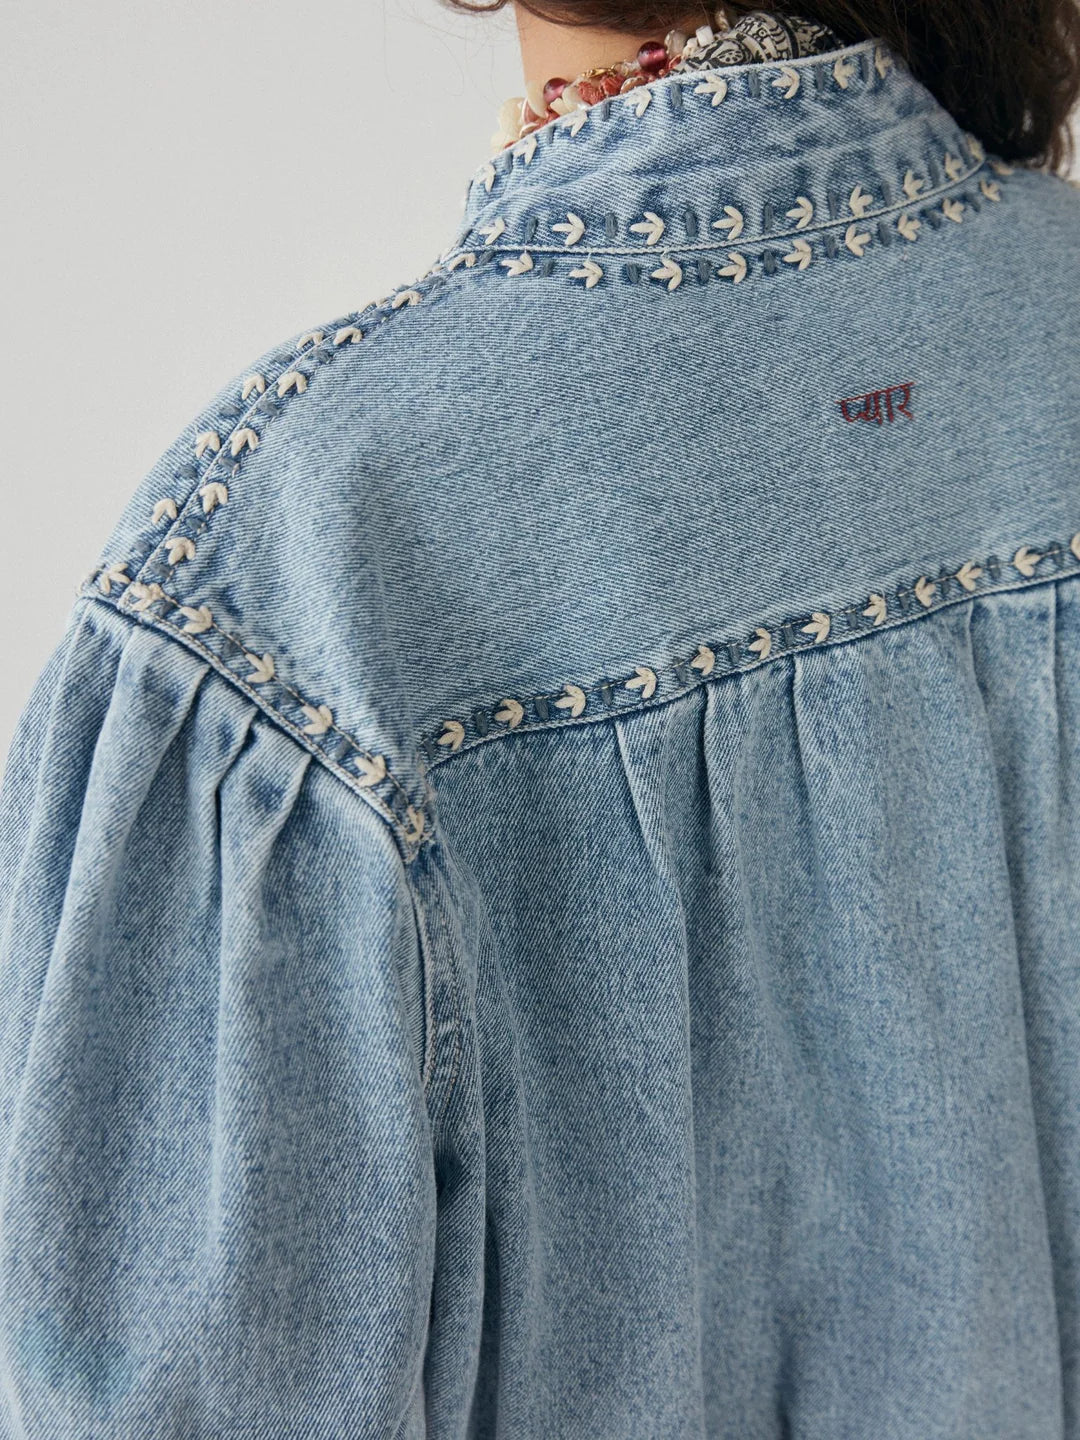 Model wears denim jacket with round collar and embroidered seams and cuffs